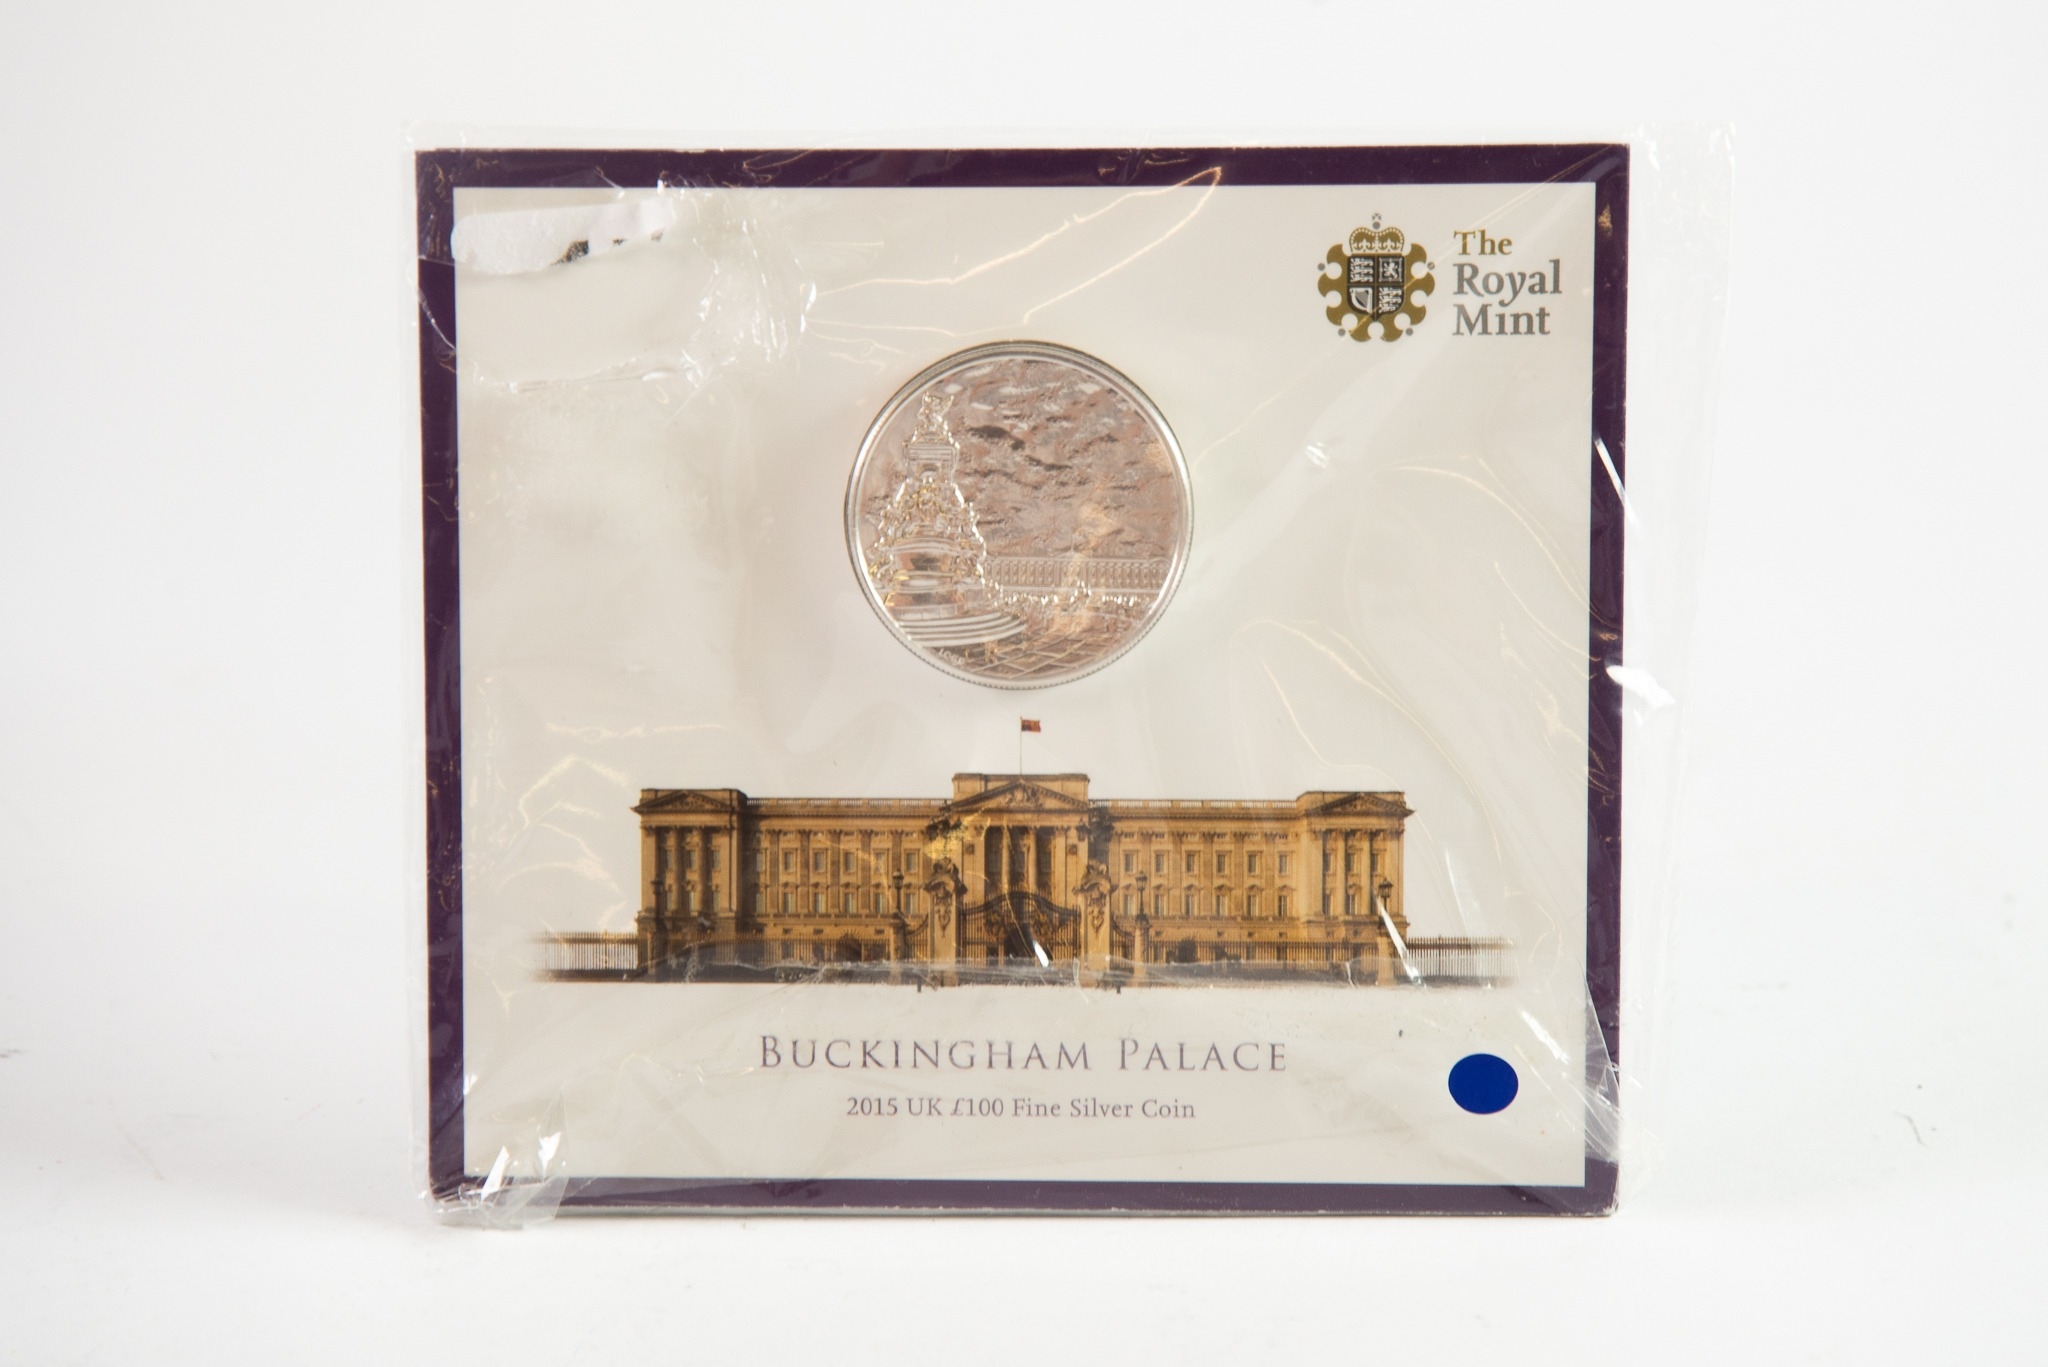 ROYAL MINT, BRILLIANT UNCIRCULATED SILVER BUCKINGHAM PALACE 2015 £100 COIN, 62.86gms, enclosed in